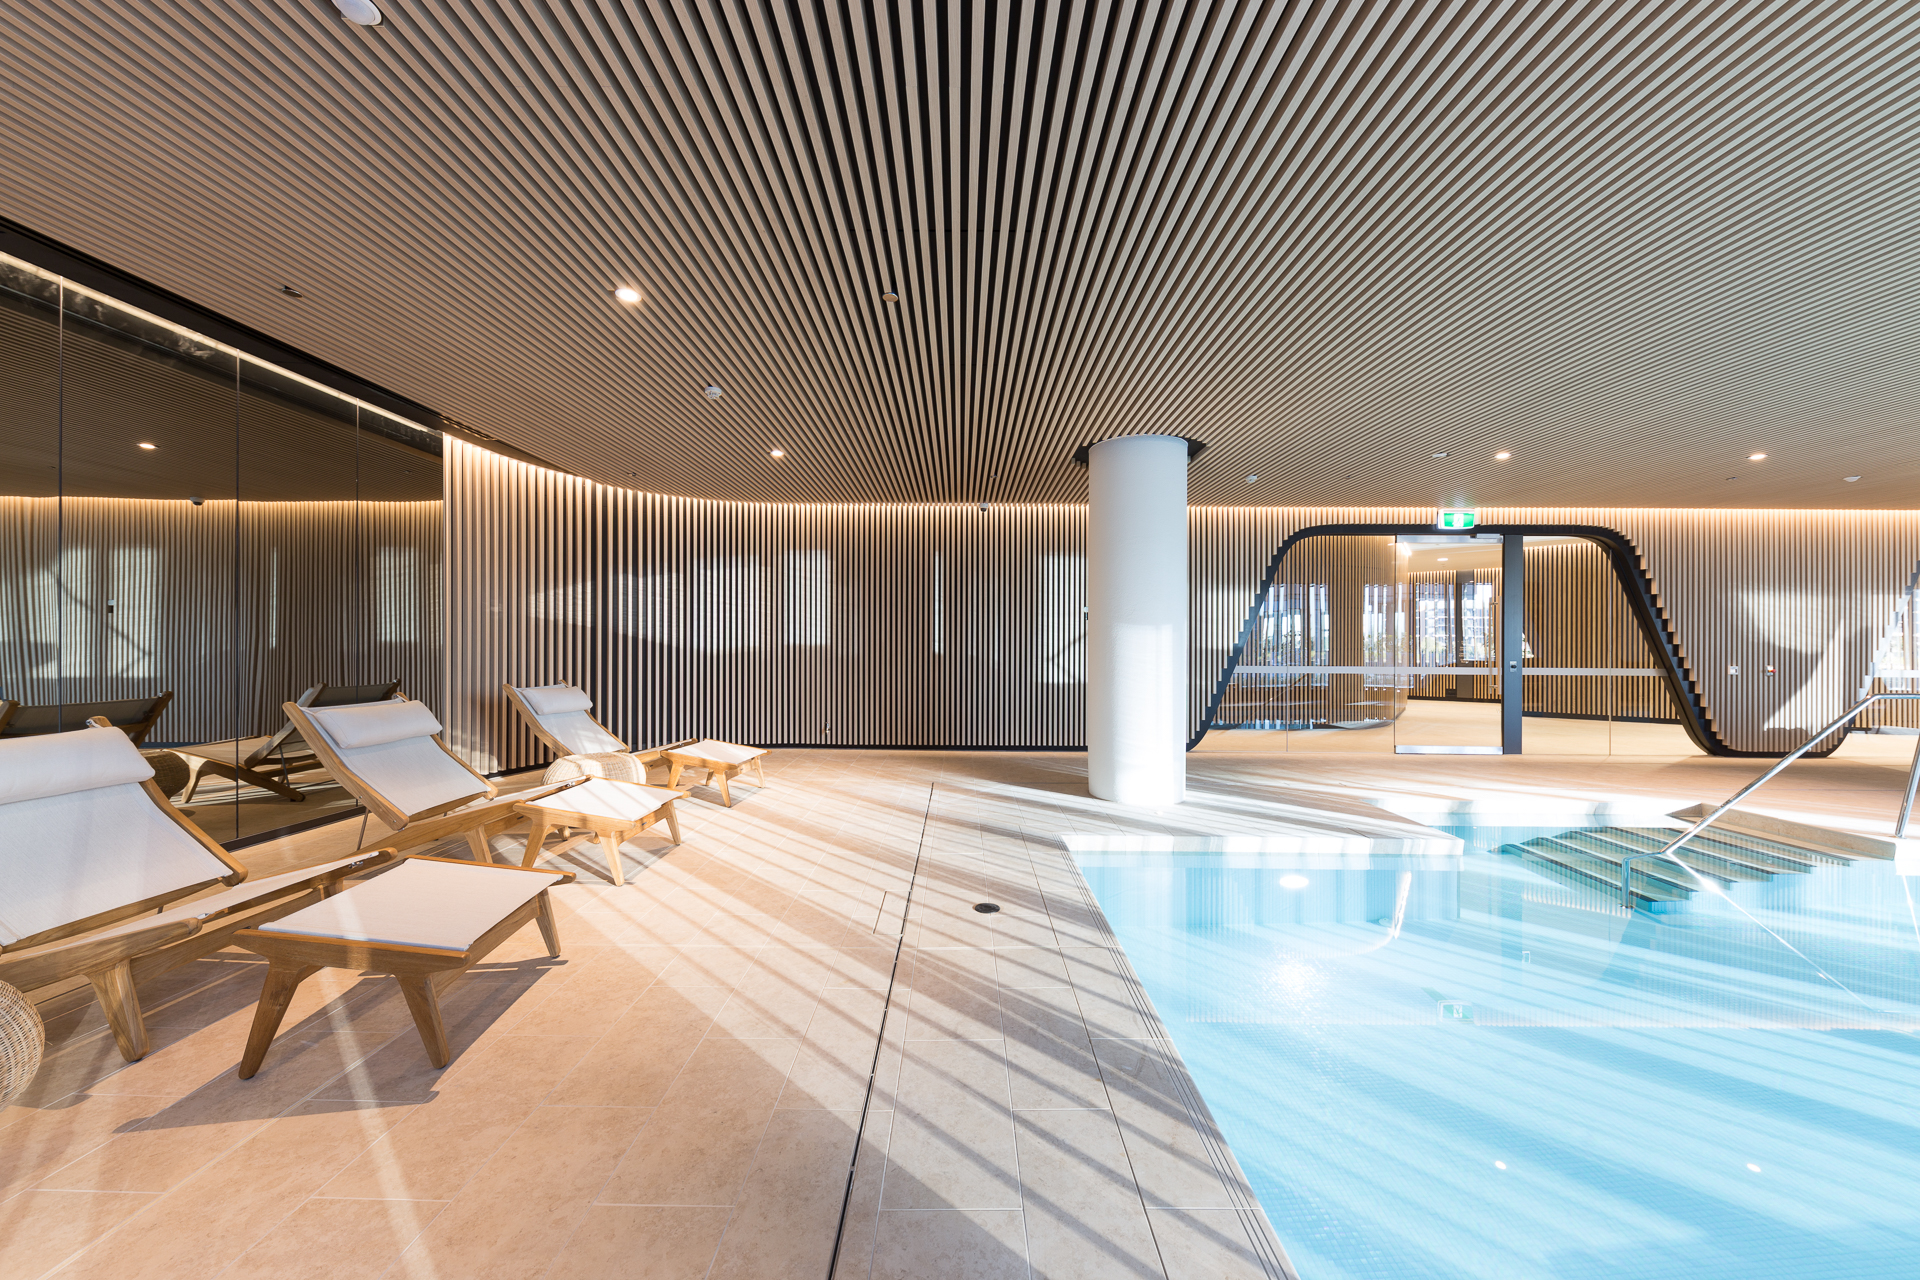 883 Collins St Multi-residential Pool Amenities - Melbourne VIC